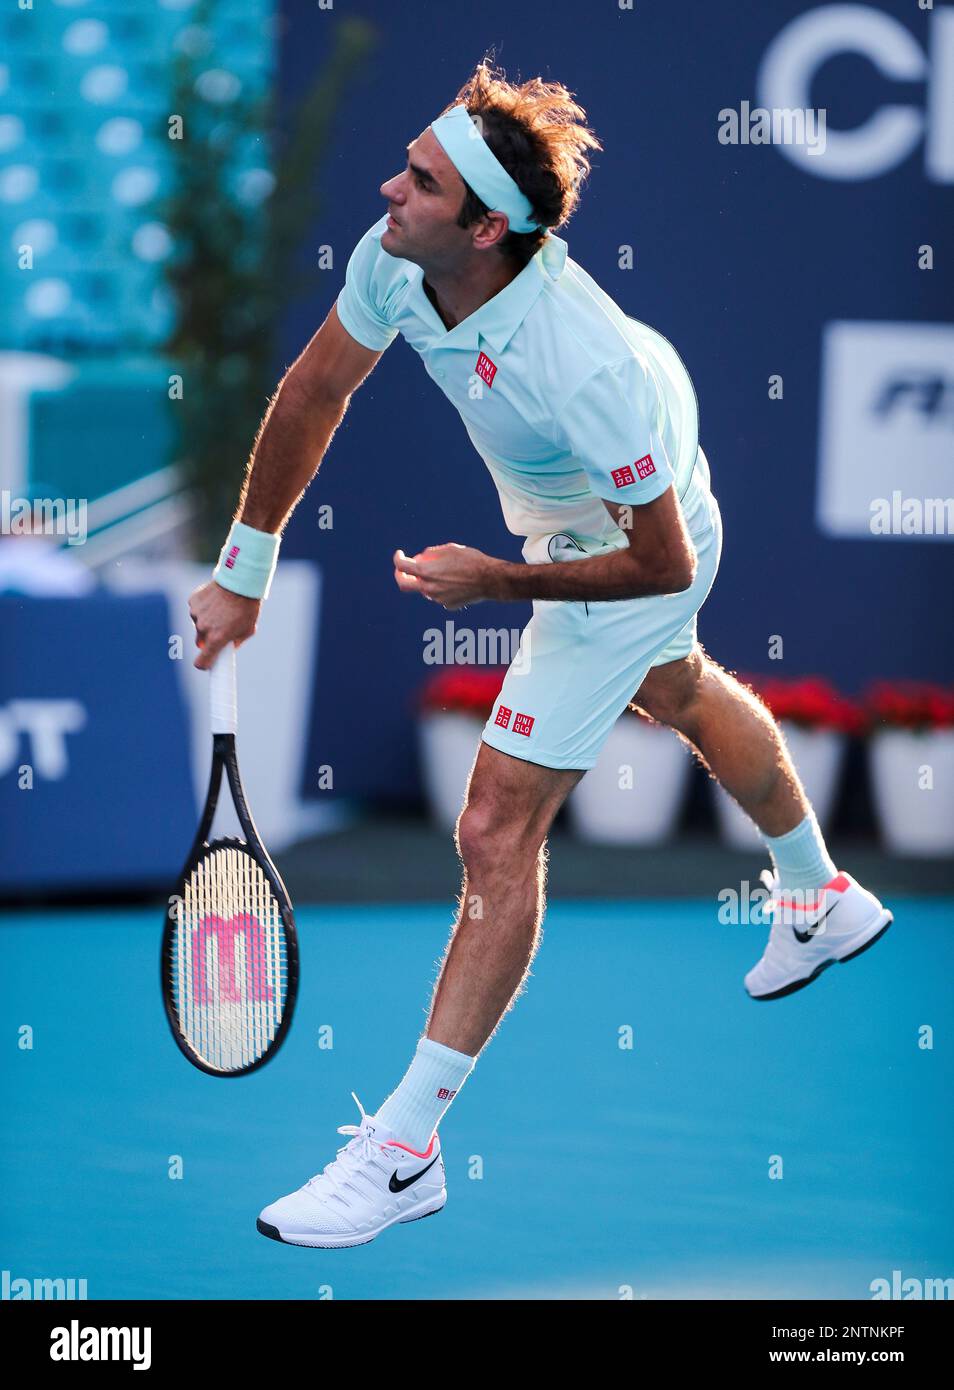 March 23, 2019: Roger Federer, of Switzerland, serves against Radu Albot,  of Moldova, in a second round match during the 2019 Miami Open Presented by  Itau professional tennis tournament, played at the